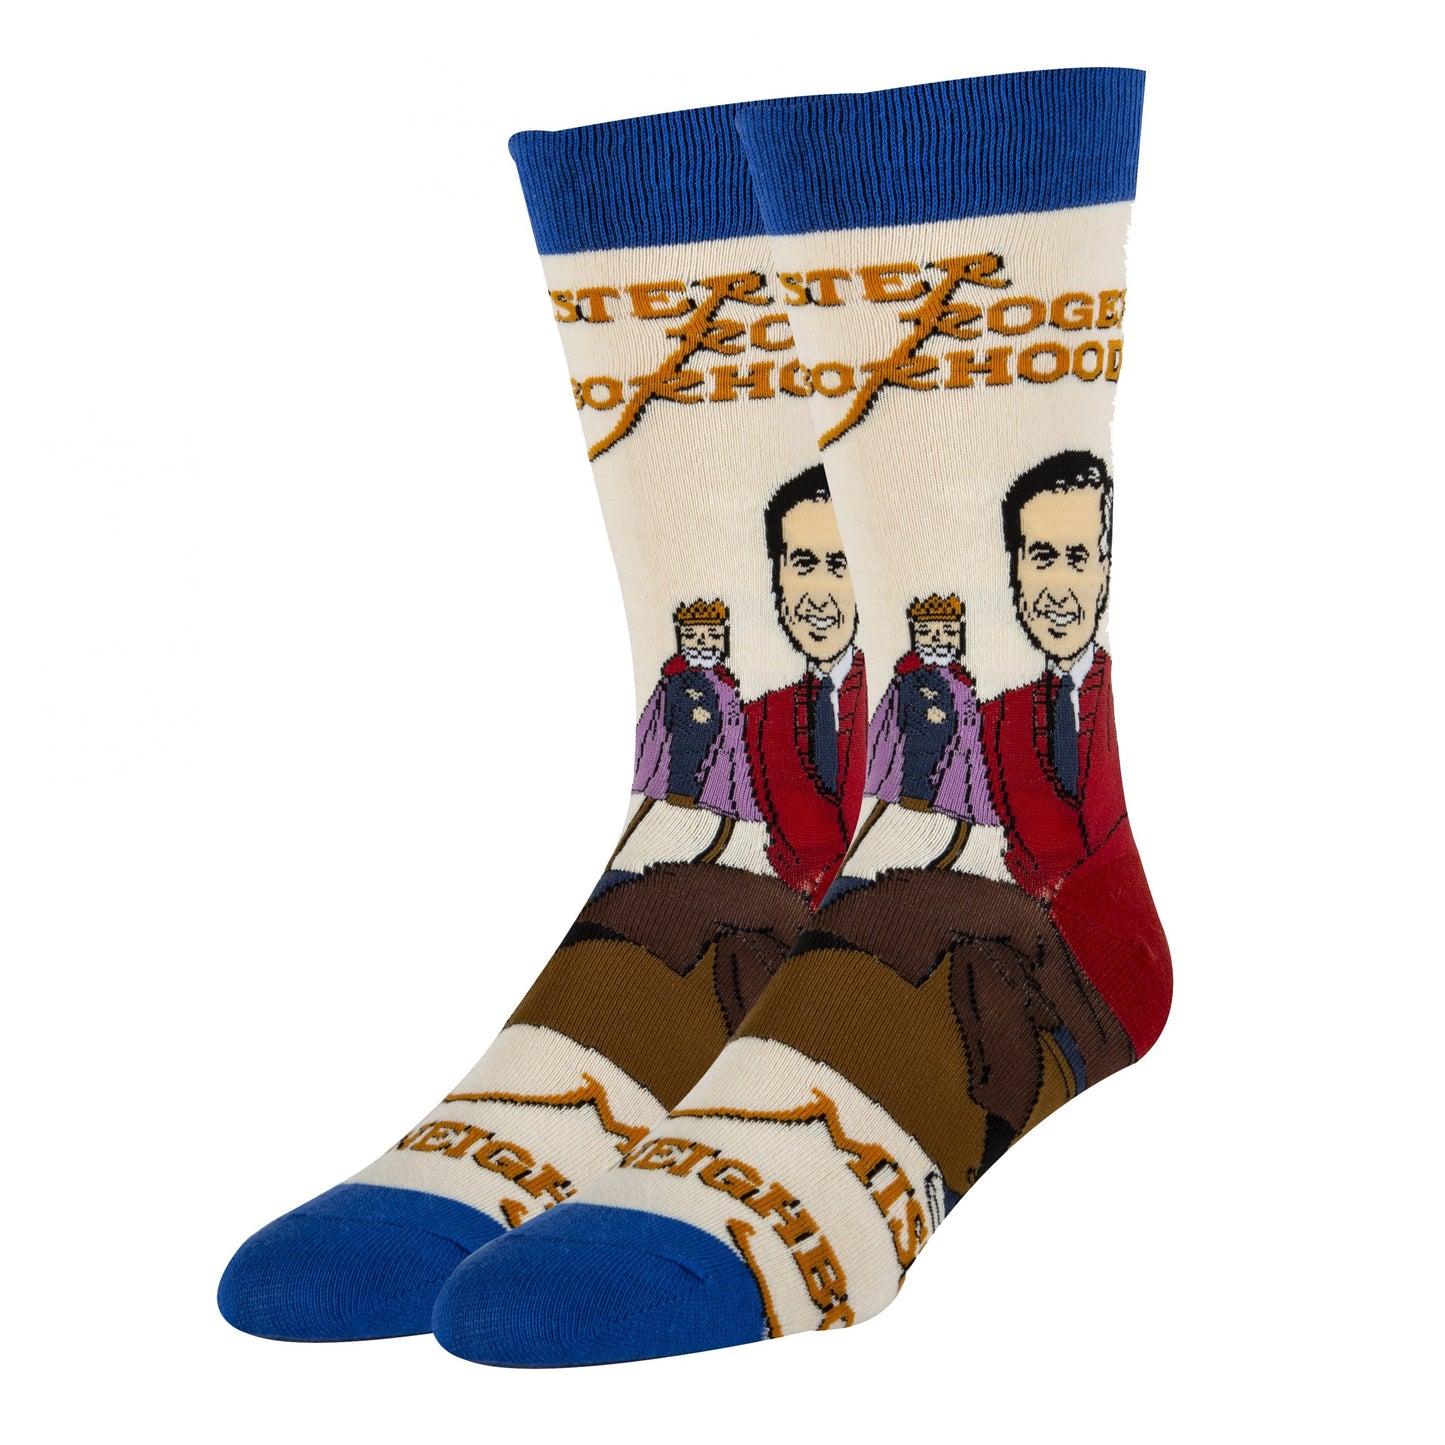 Mister Rogers and King Friday XIII crew sock